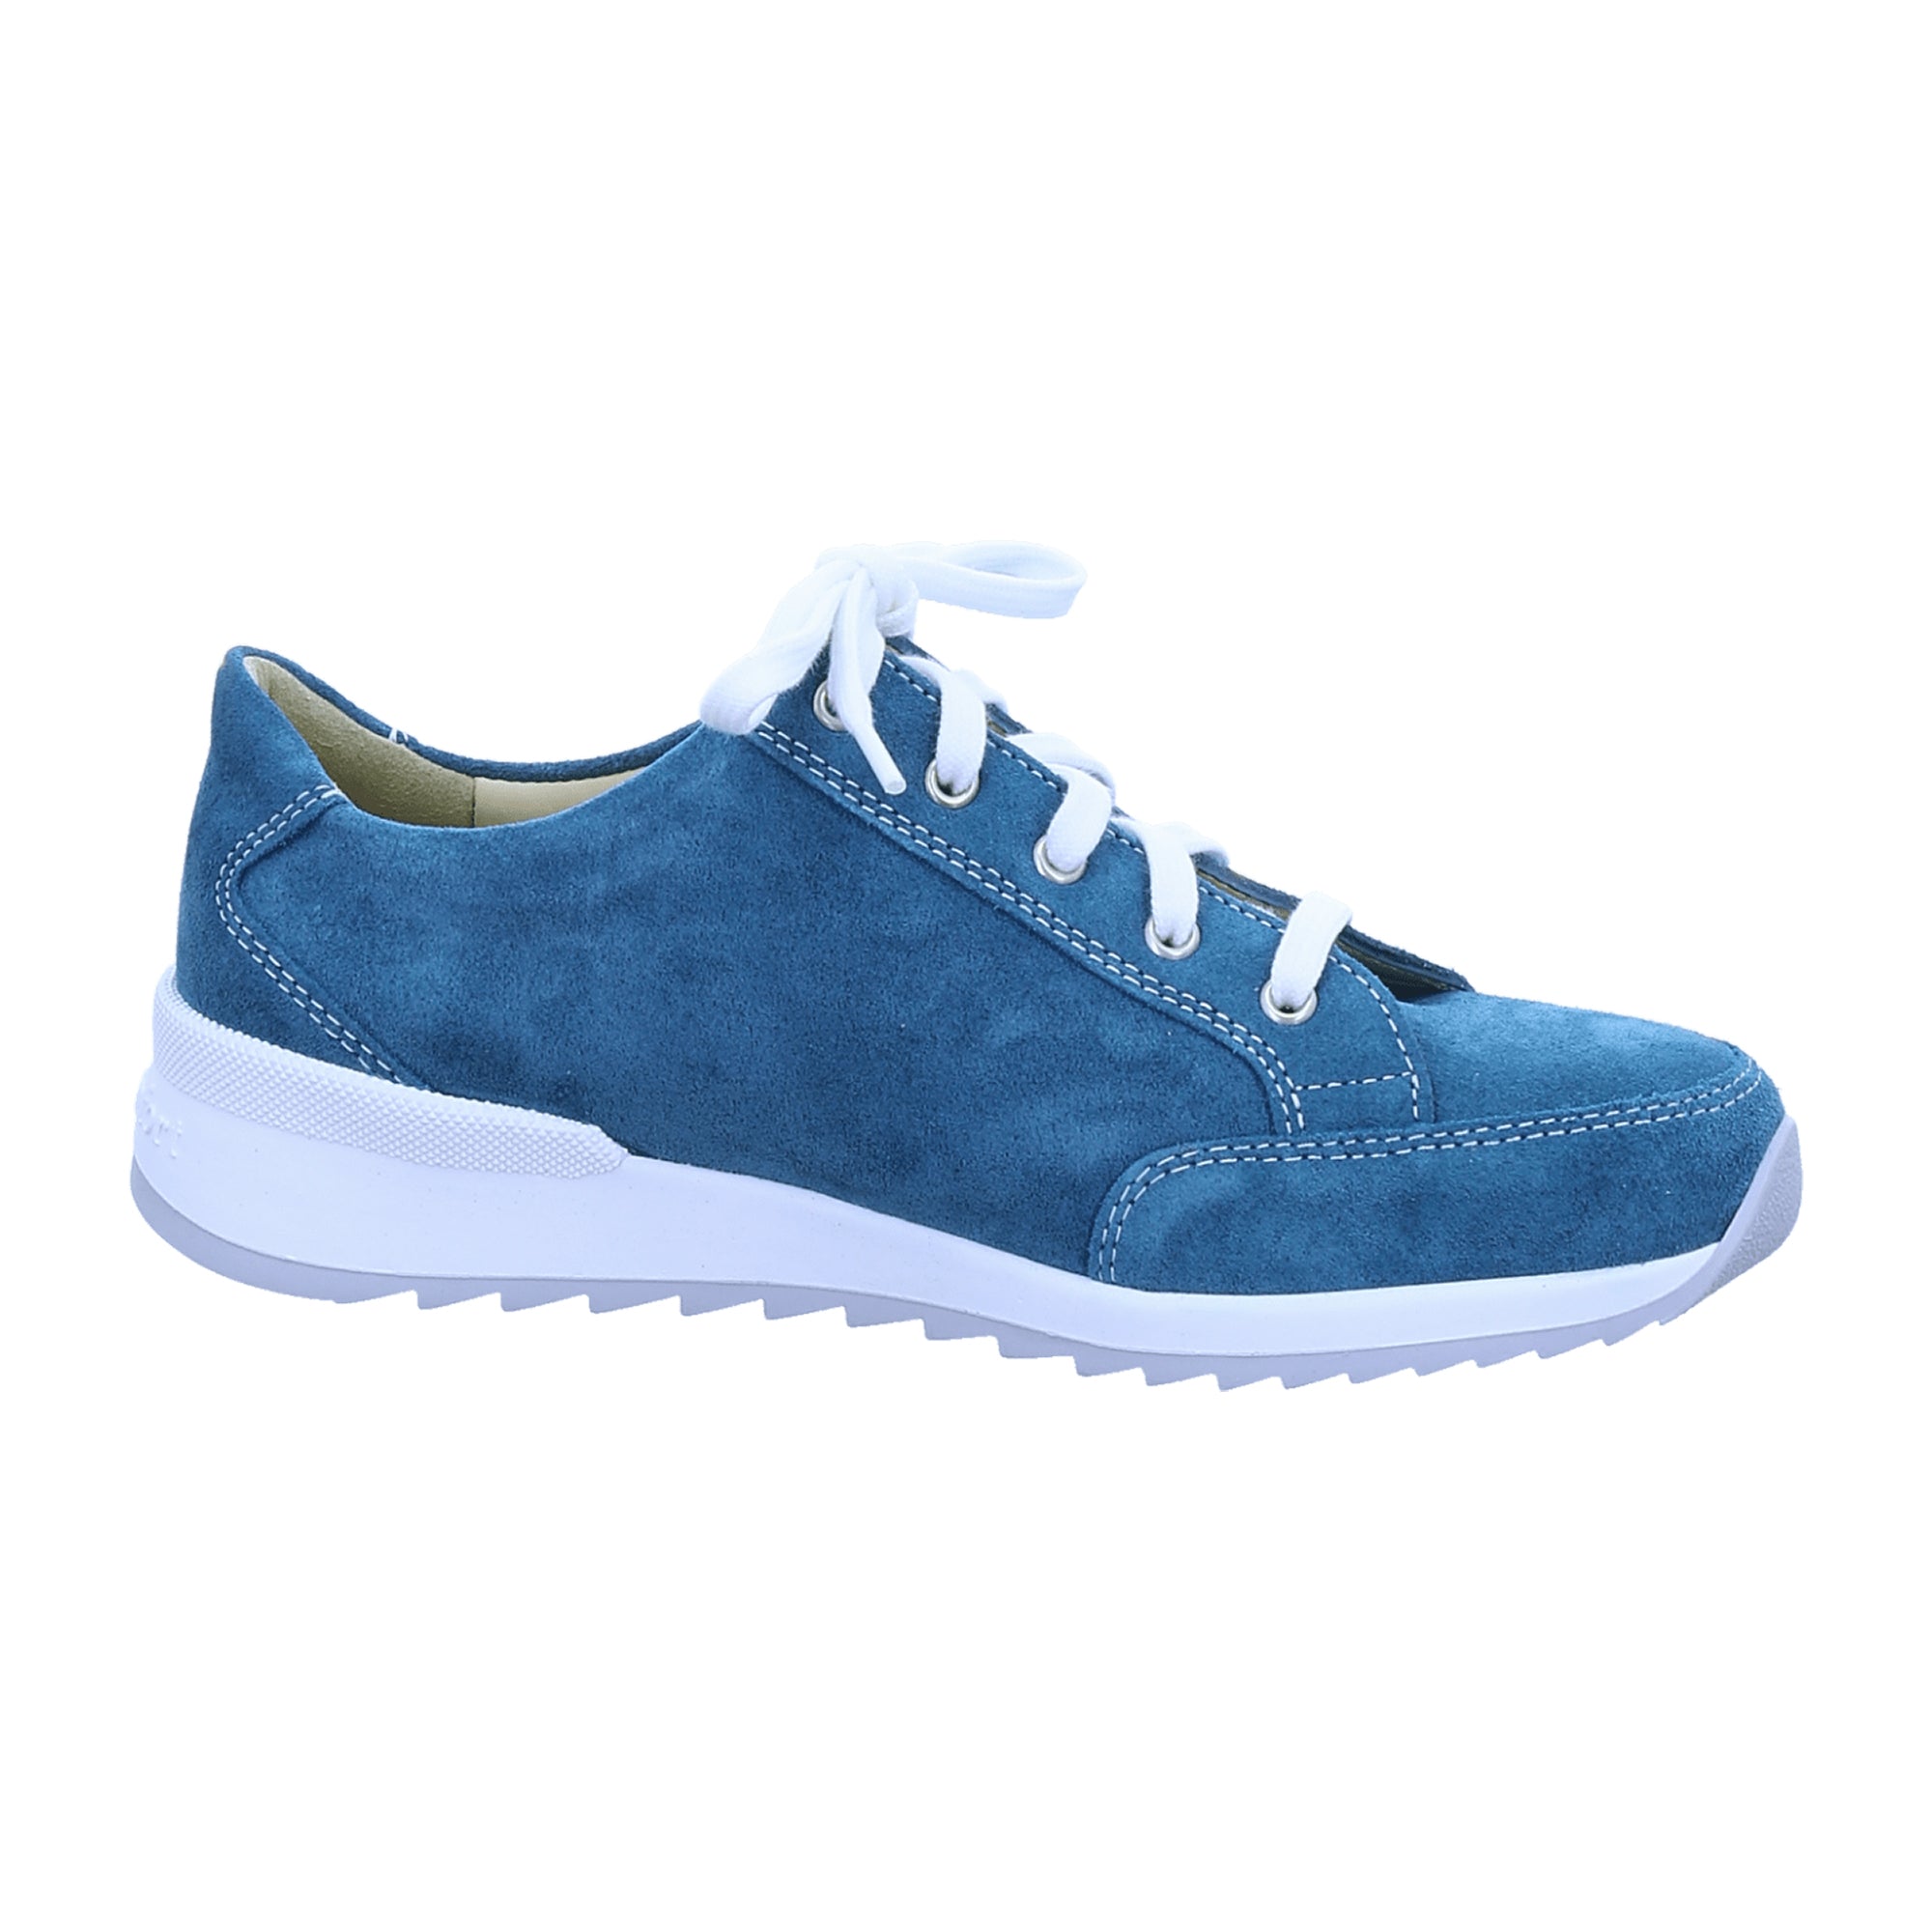 Finn Comfort Pordenone Women's Blue Sneakers - Comfort Lace-Up Shoes with Removable Cork Footbed